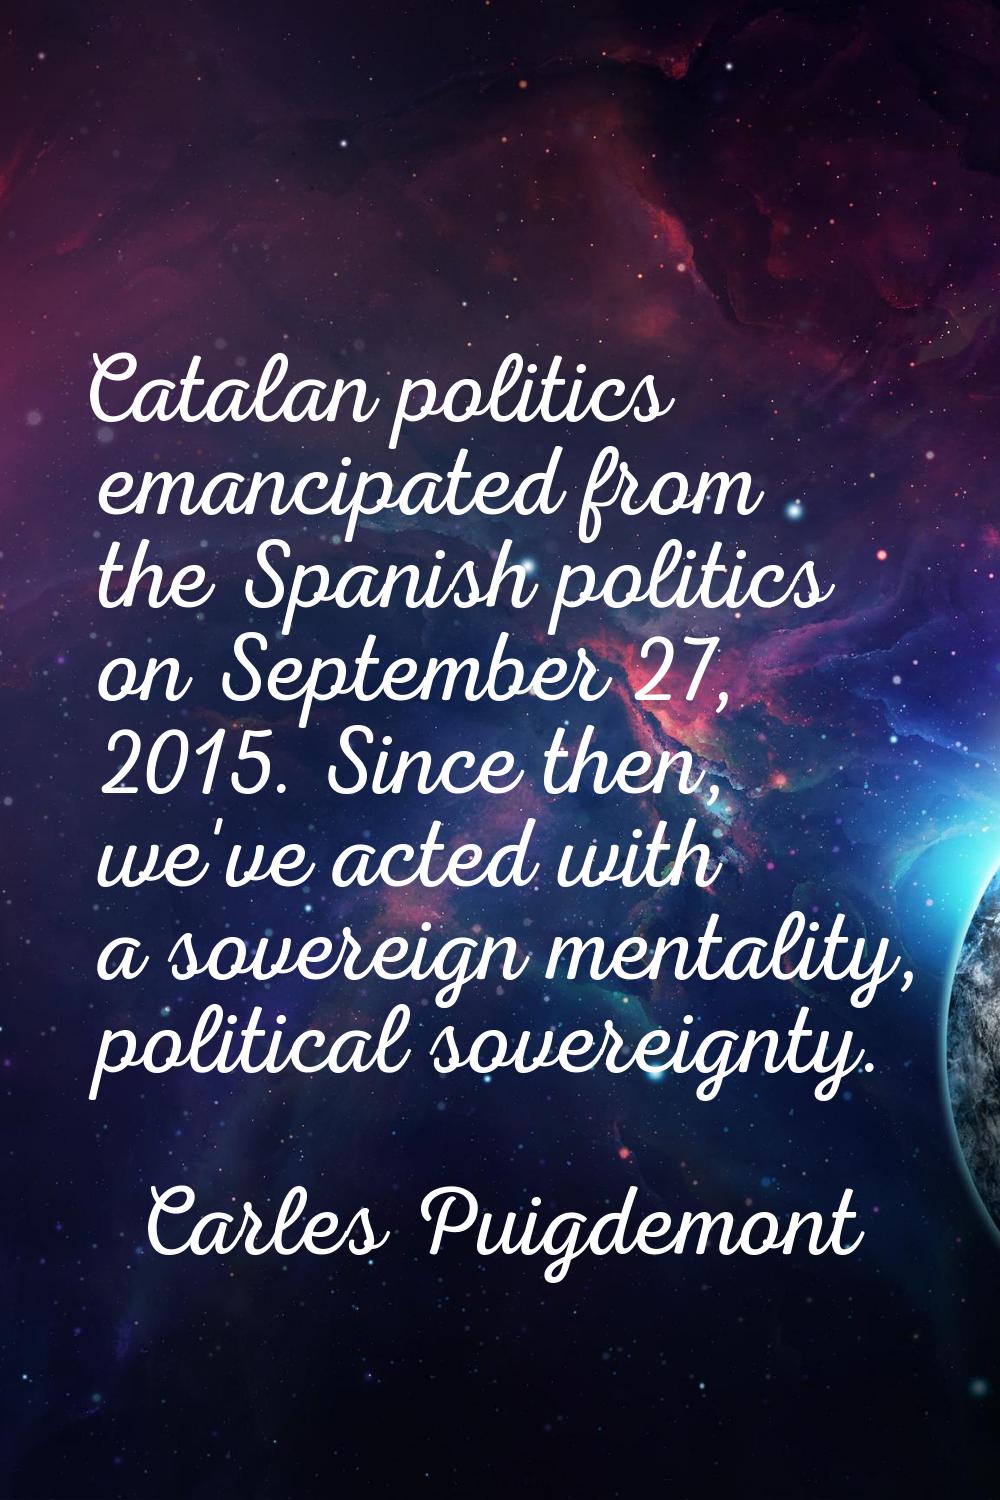 Catalan politics emancipated from the Spanish politics on September 27, 2015. Since then, we've act